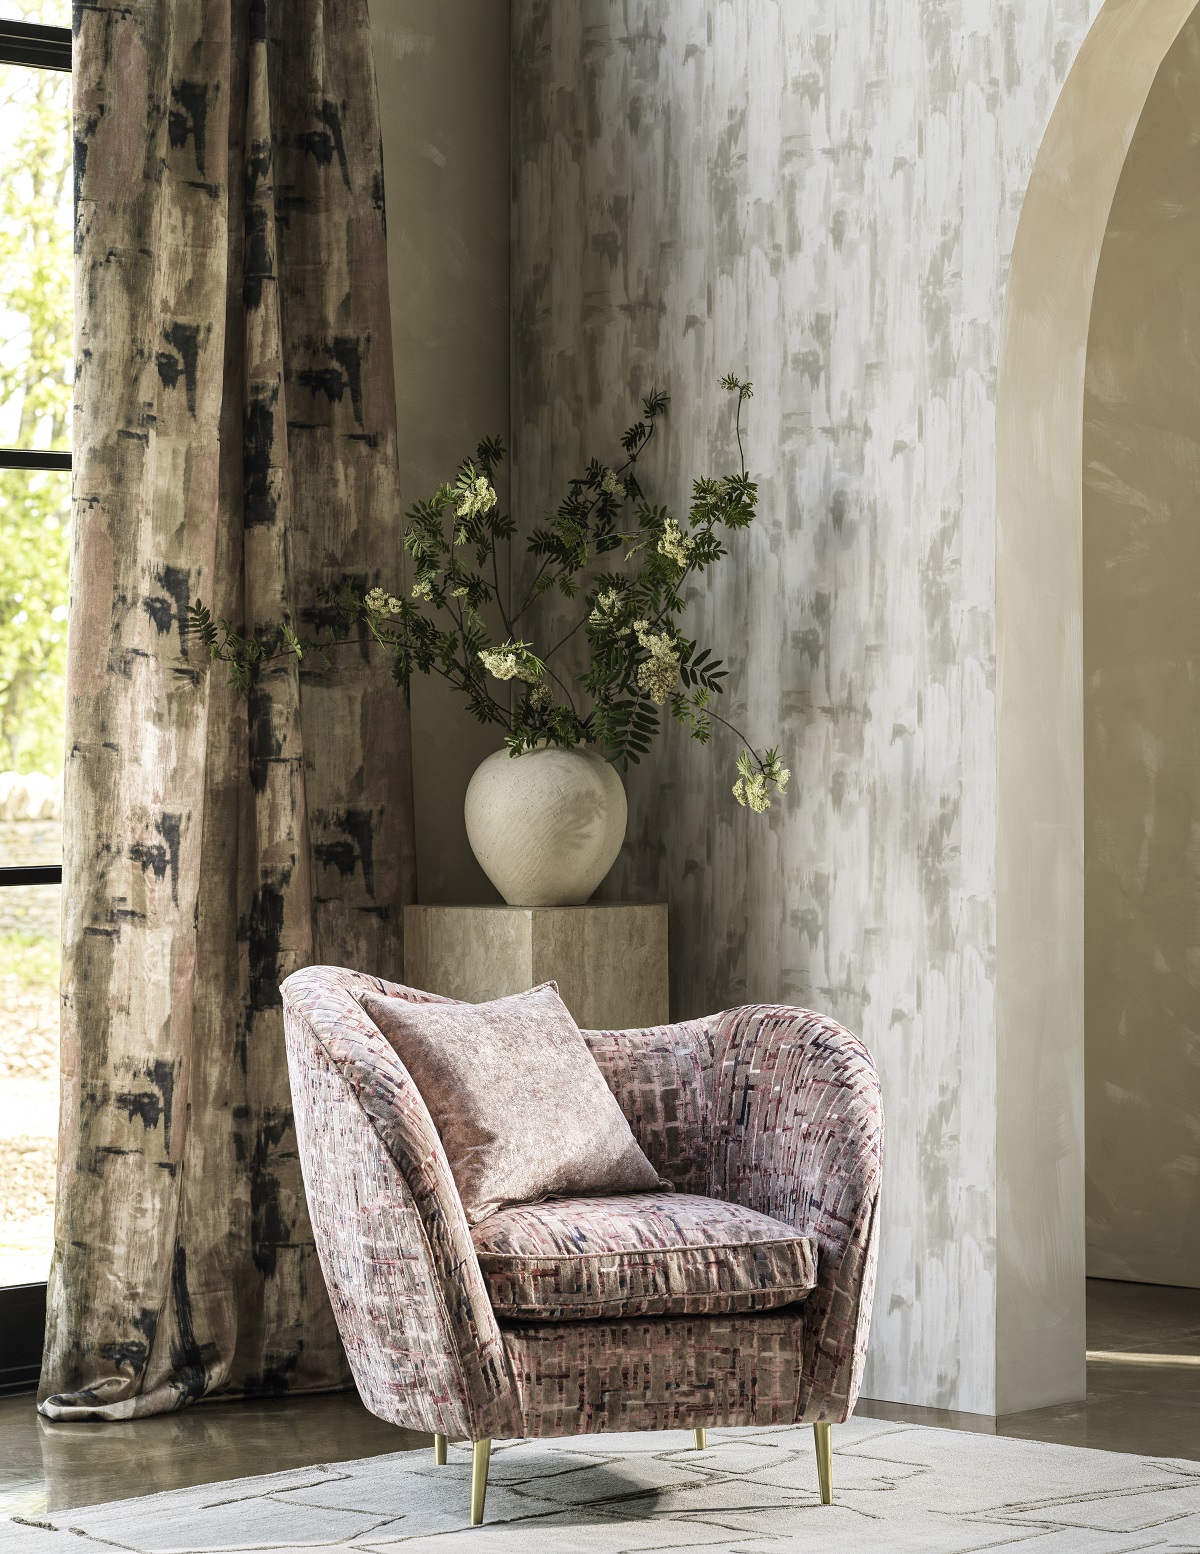 corner of a room with chair in front of a vase of flowers and patterned wallpaper and printed curtain fabric